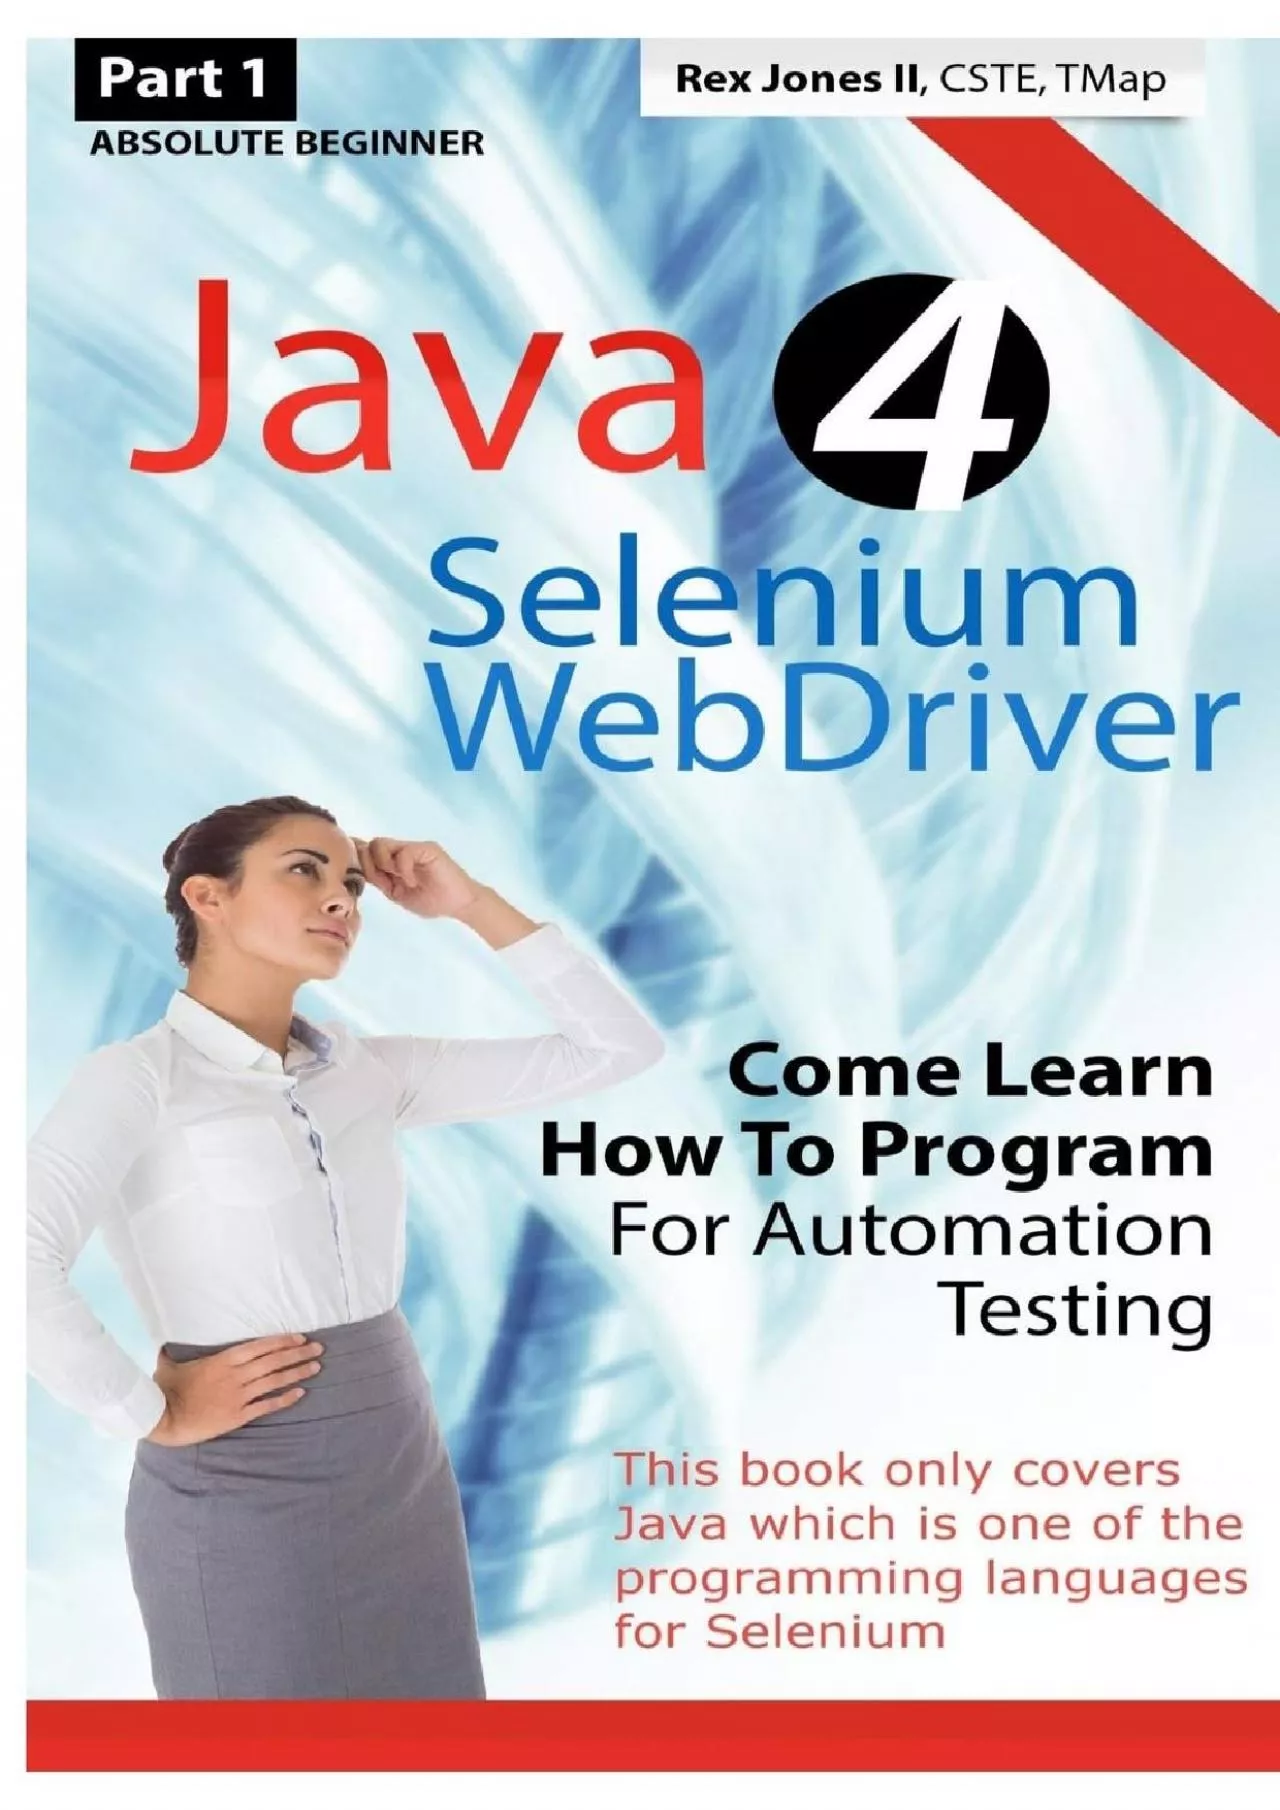 [BEST]-Absolute Beginner (Part 1) Java 4 Selenium WebDriver: Come Learn How To Program